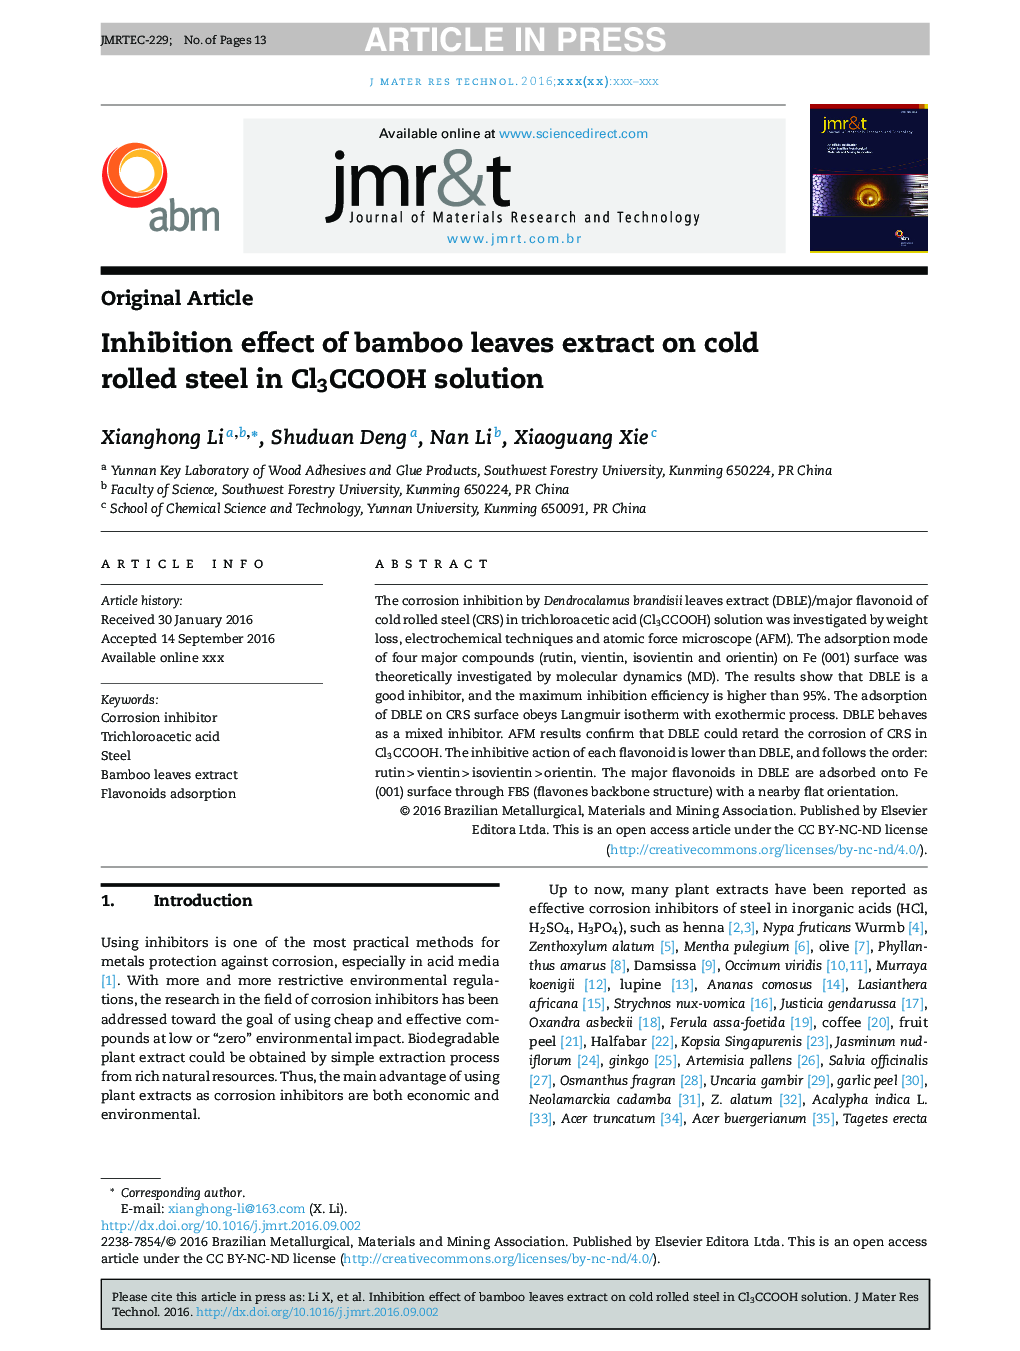 Inhibition effect of bamboo leaves extract on cold rolled steel in Cl3CCOOH solution